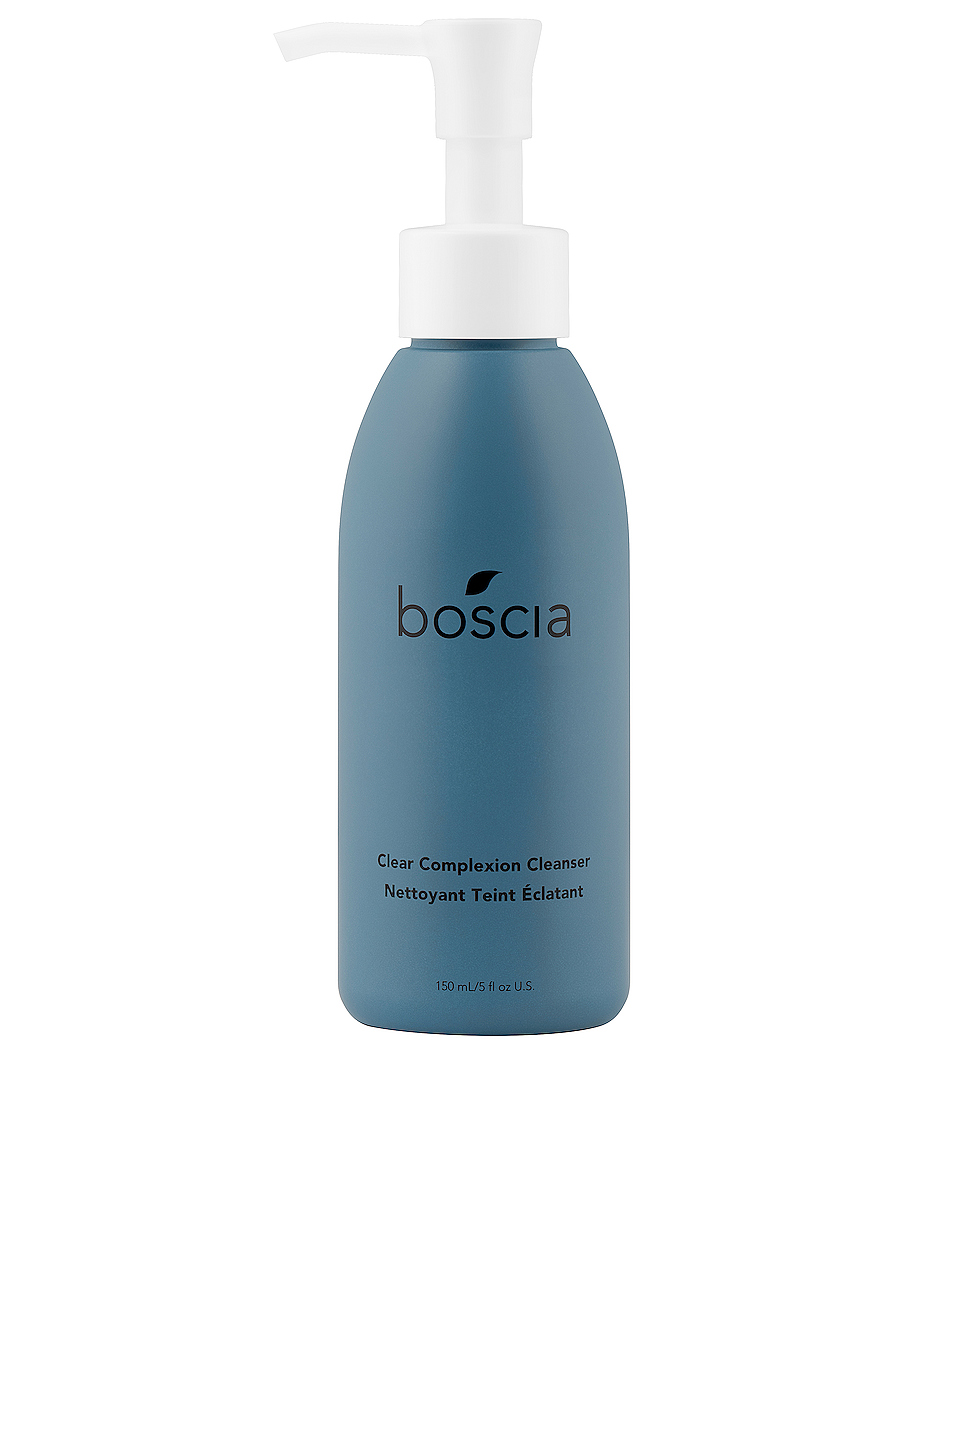 Boscia Clear Complexion Cleanser, 5oz | 150ml, cleanser, London Loves Beauty